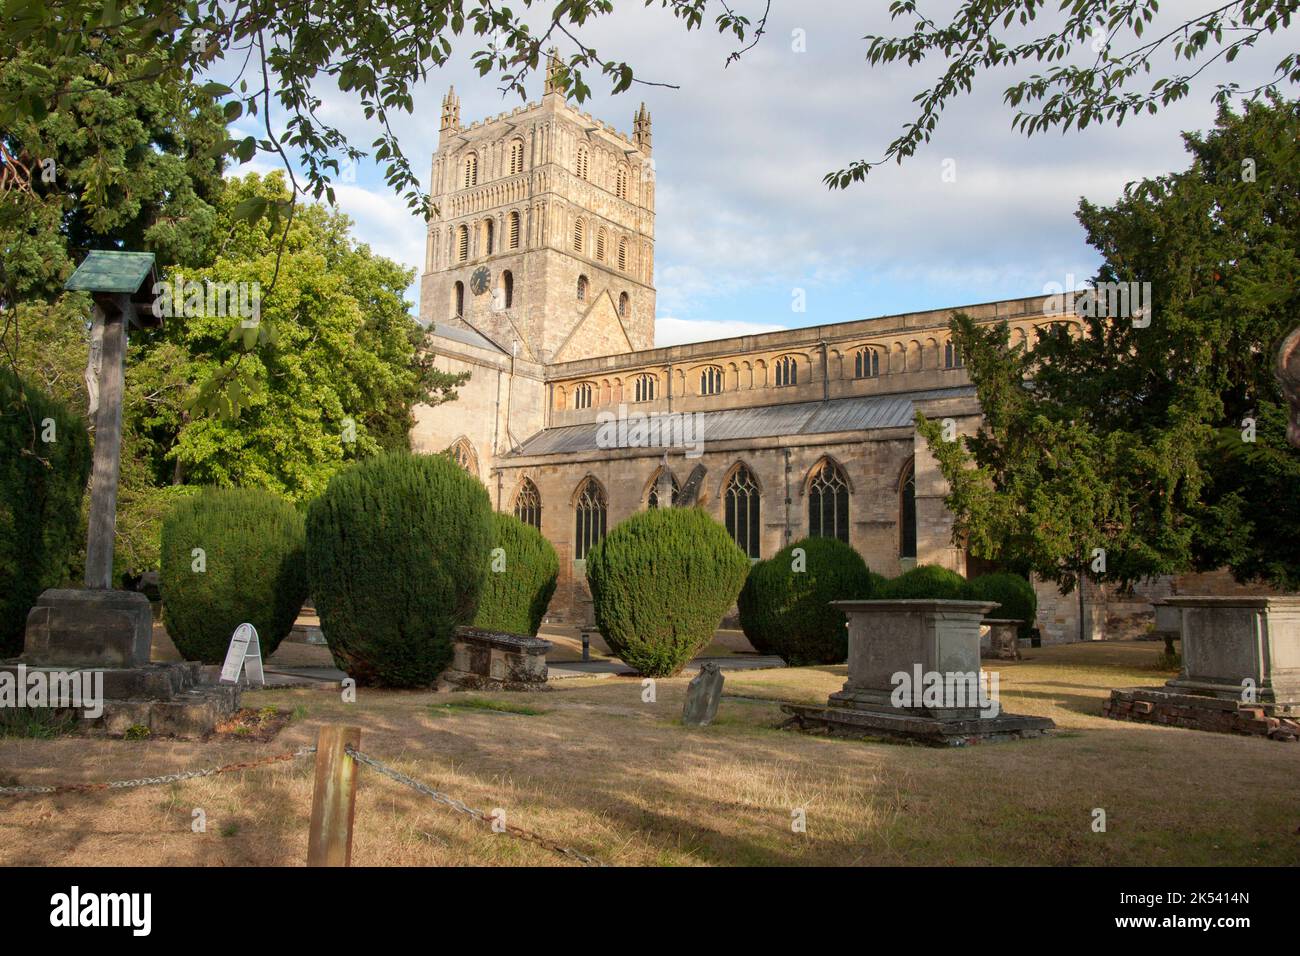 L'Abbaye de Tewkesbury, Gloucestershire, Angleterre Banque D'Images